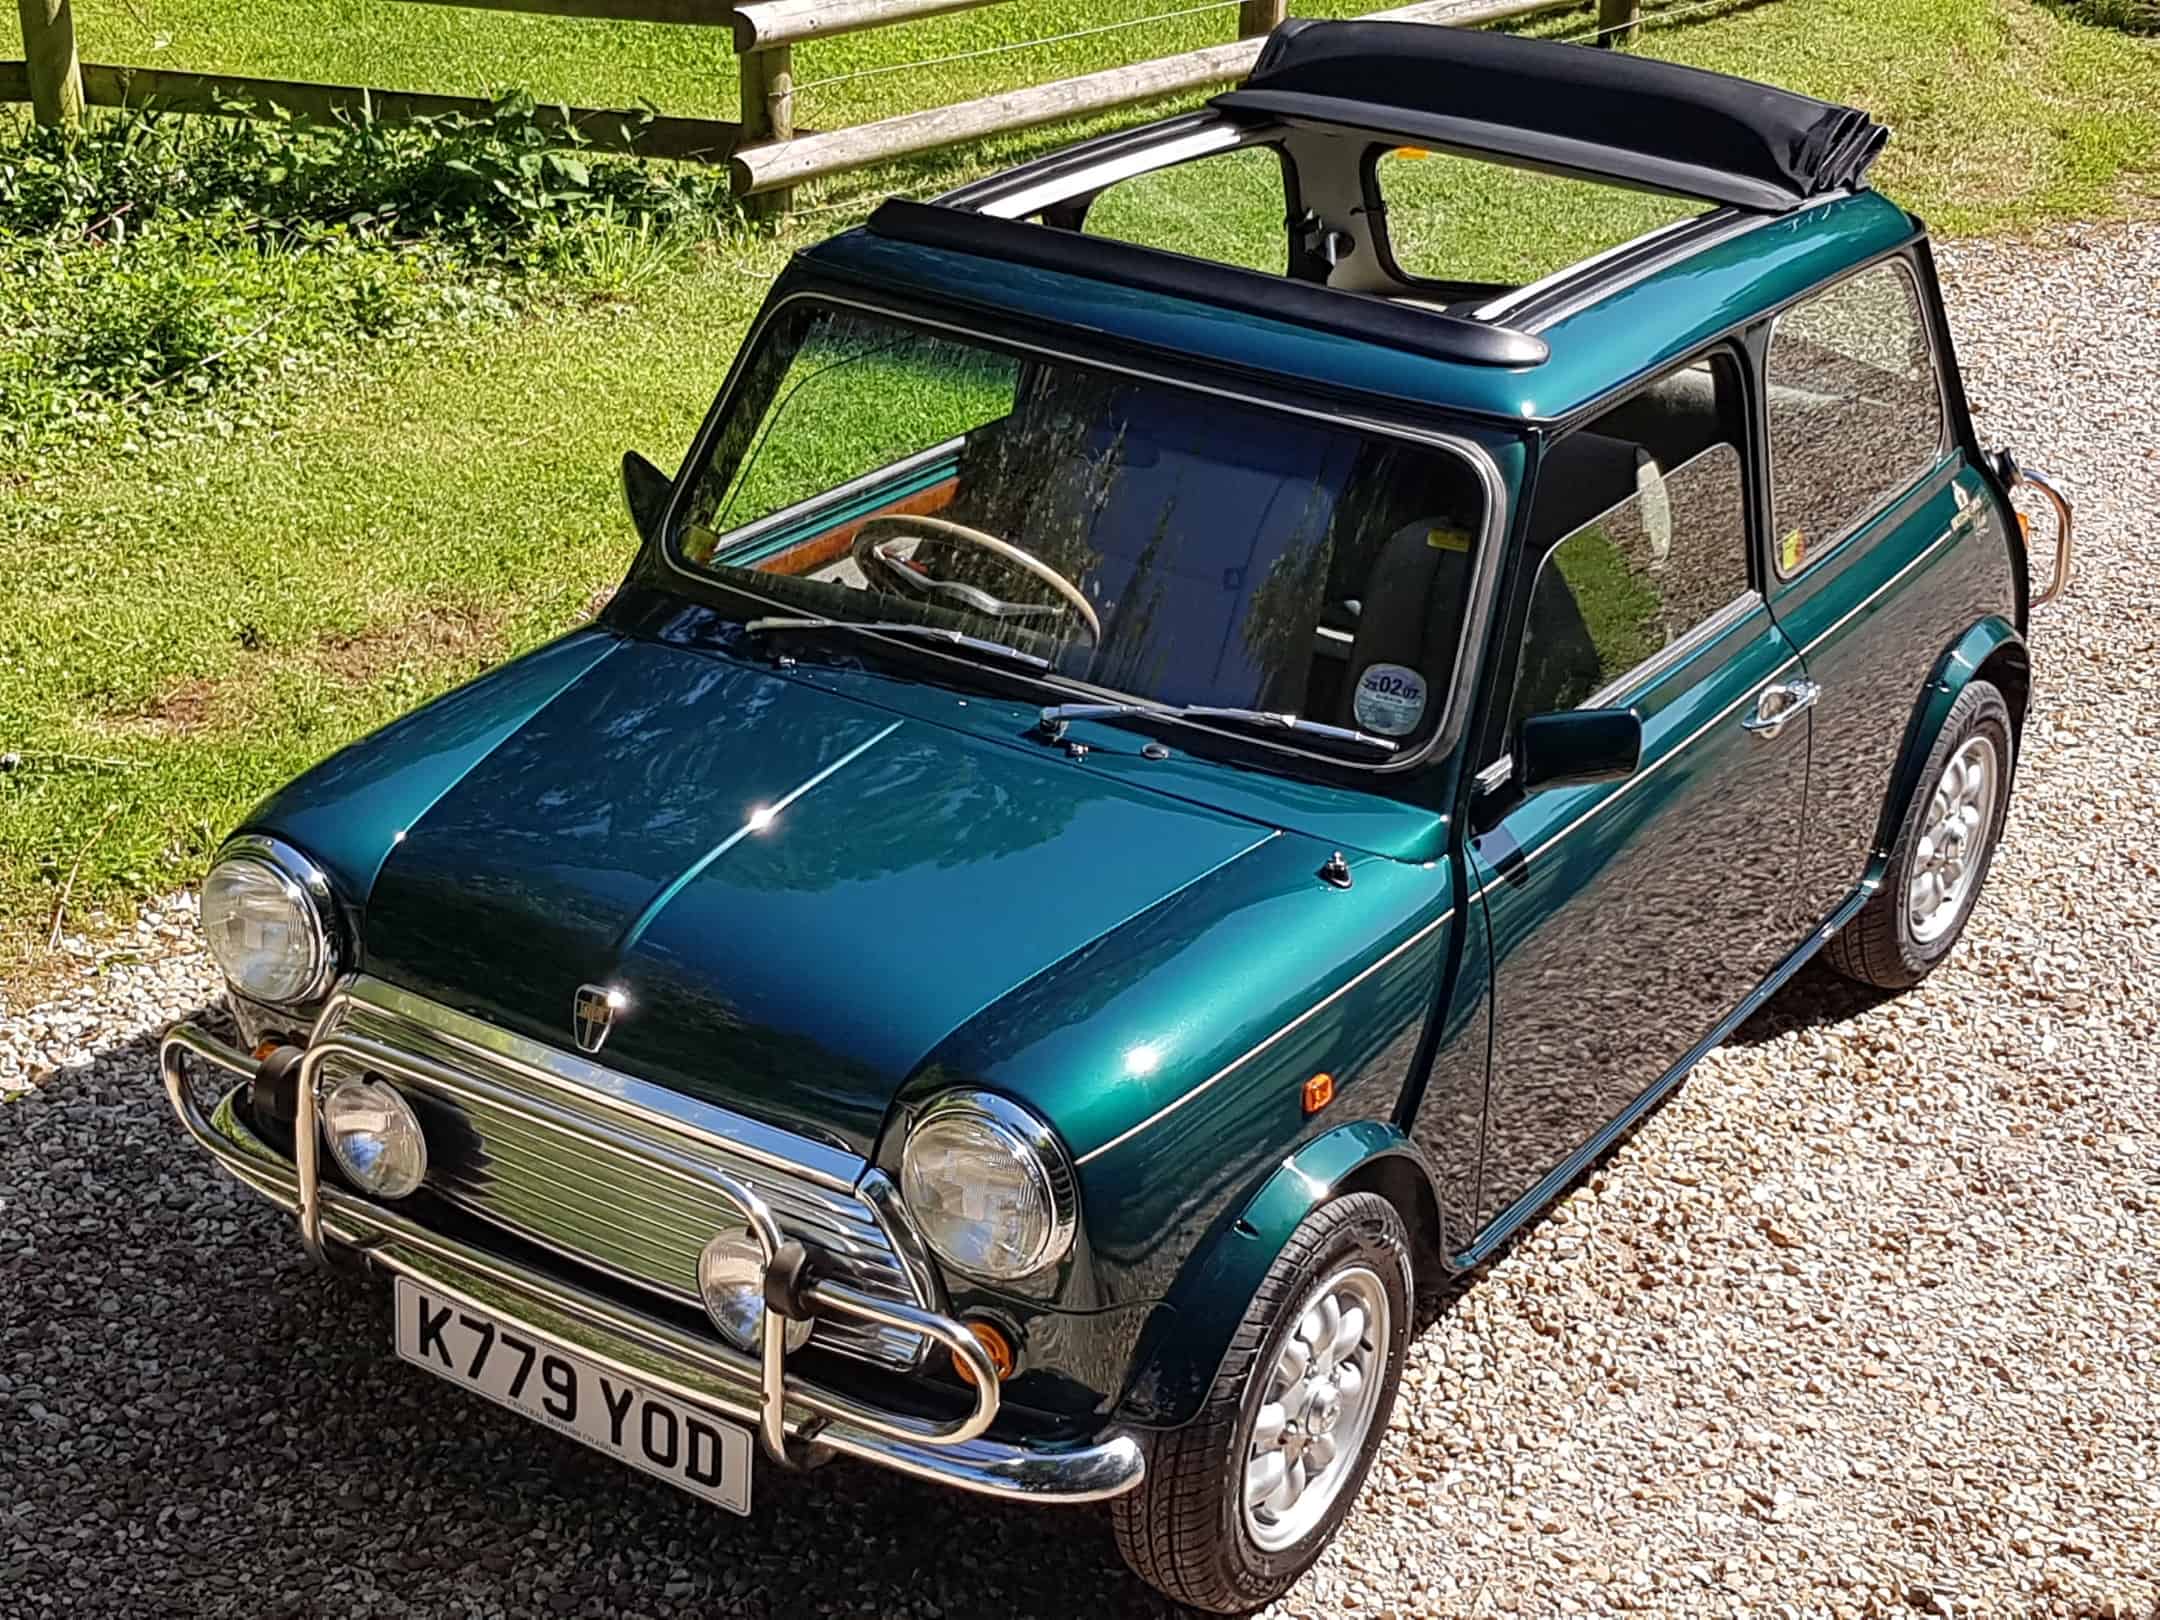 ** NOW SOLD ** Unique 1992 Mini British Open Classic LE ” Wood and Pickett” On Just 3660 Miles From New!